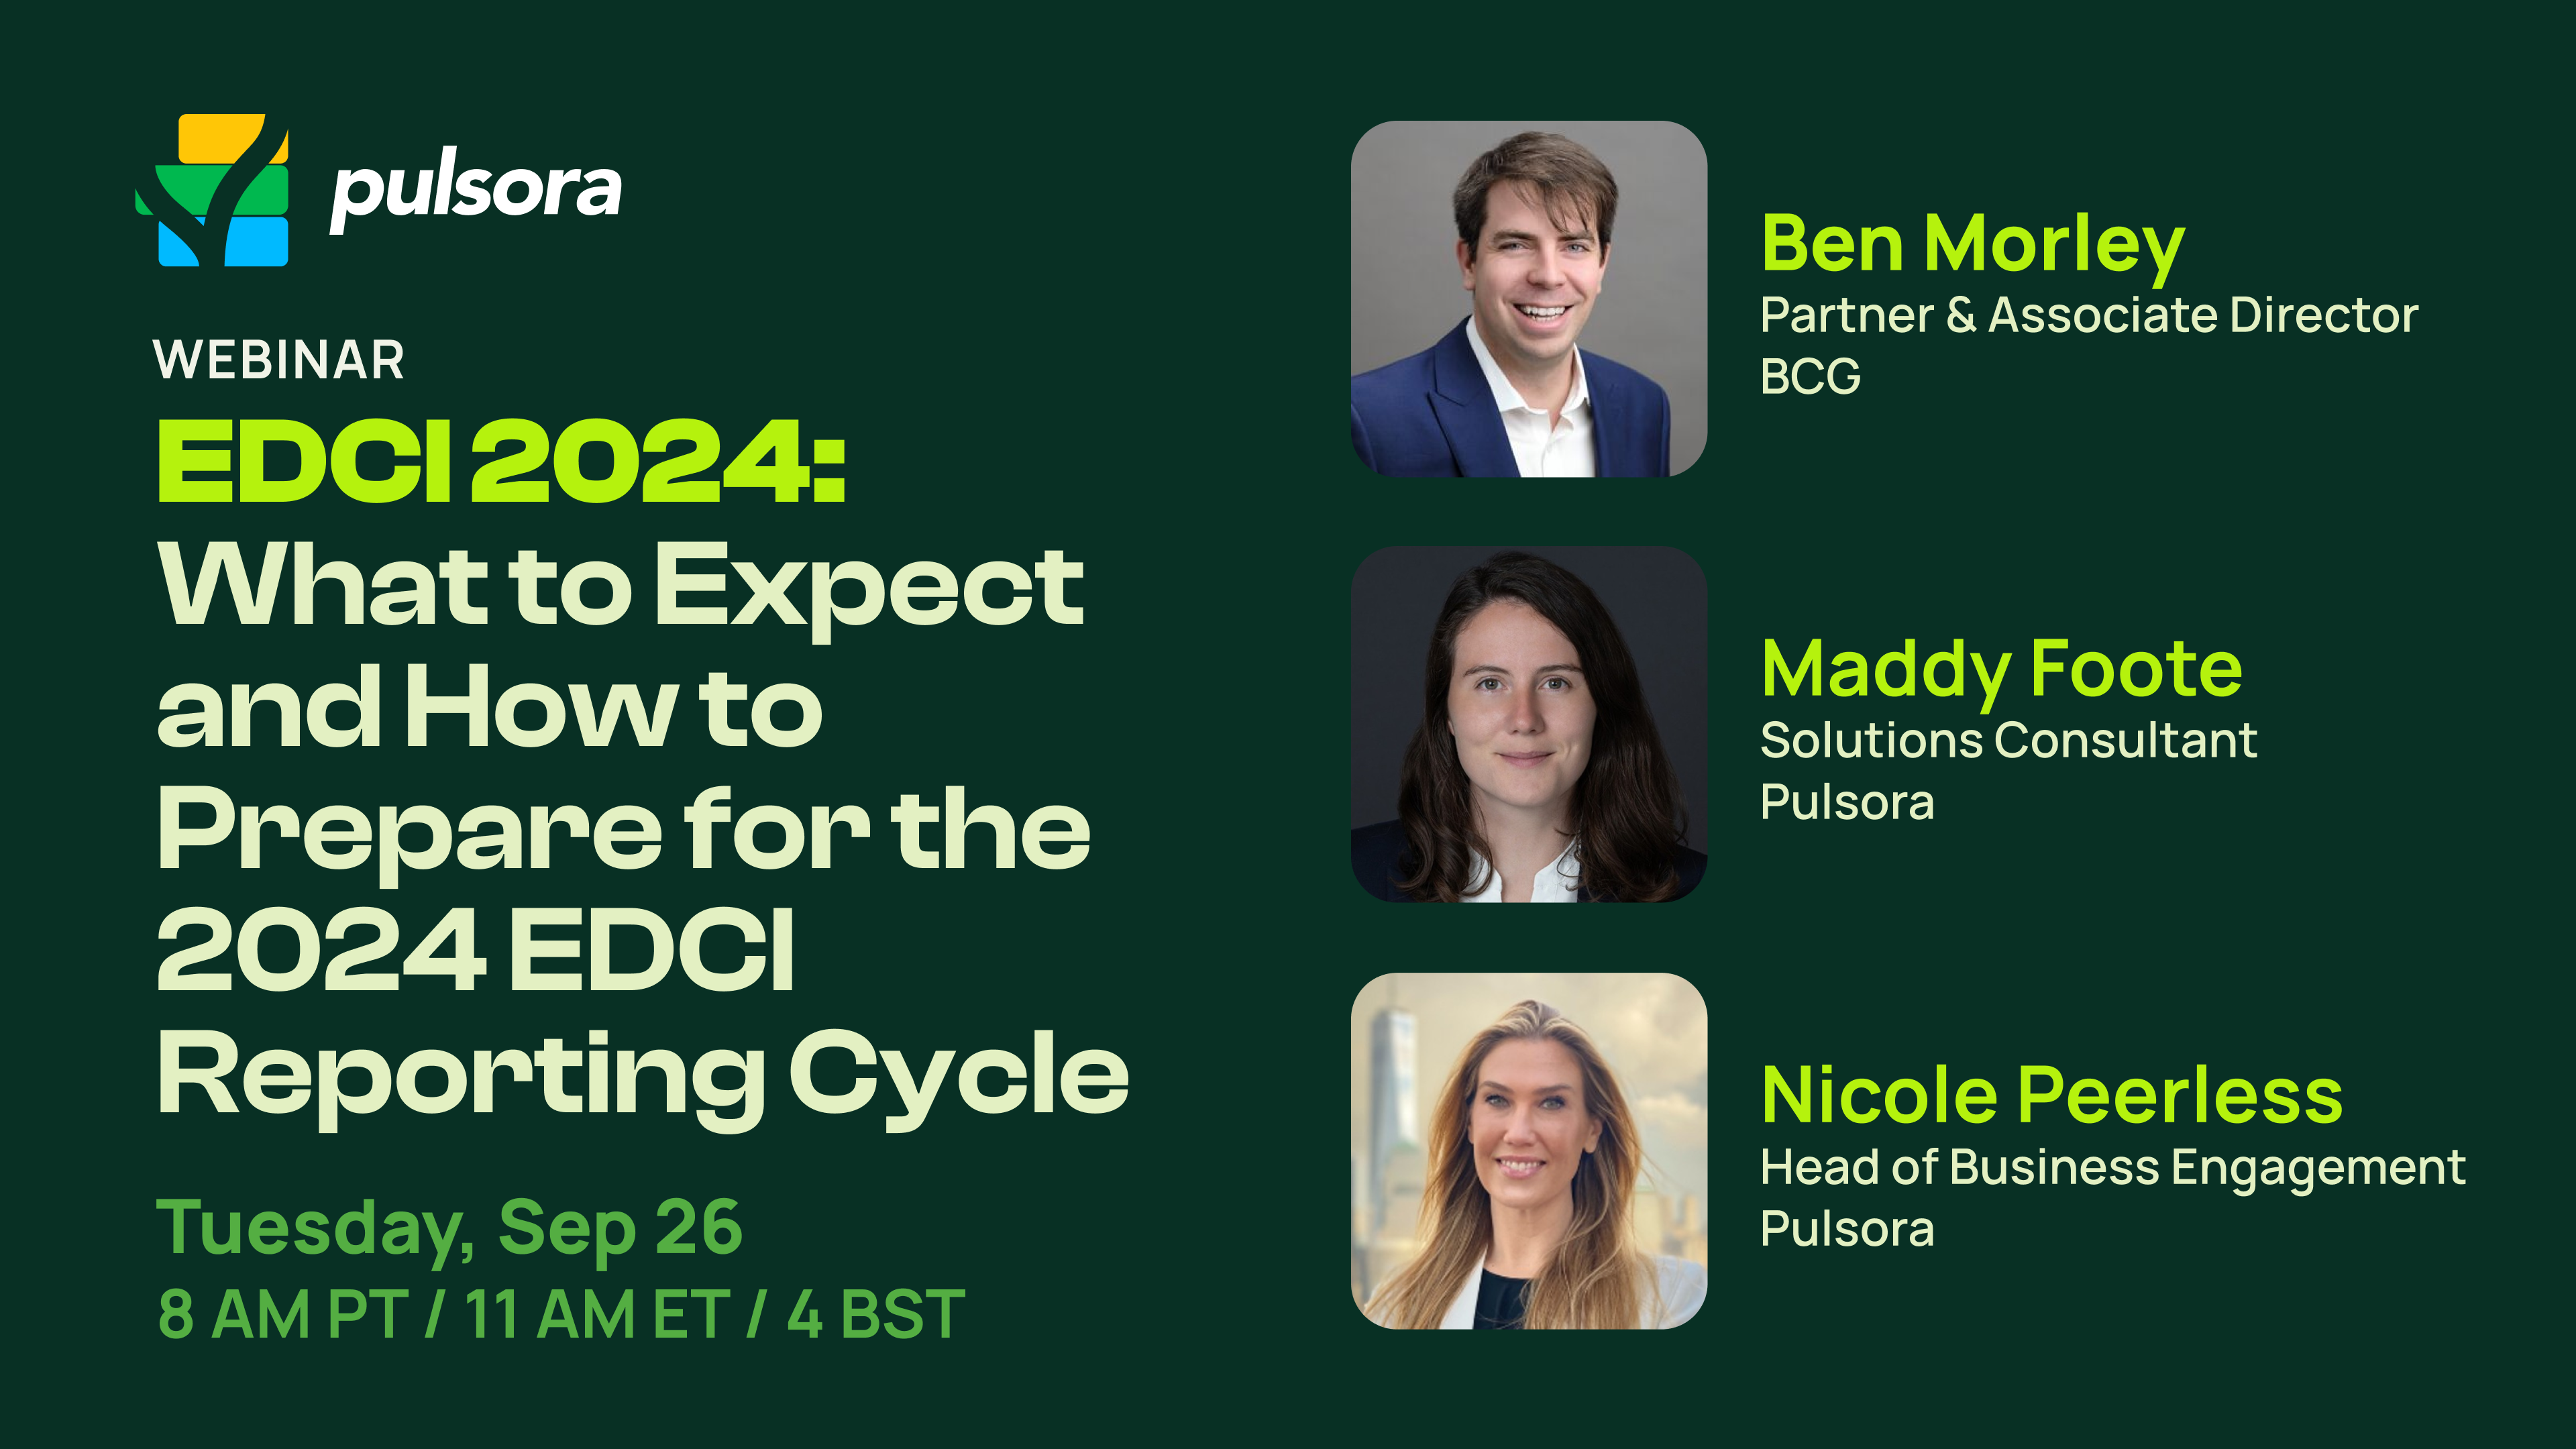 EDCI 2024: What to Expect and How to Prepare for the 2024 EDCI Reporting Cycle